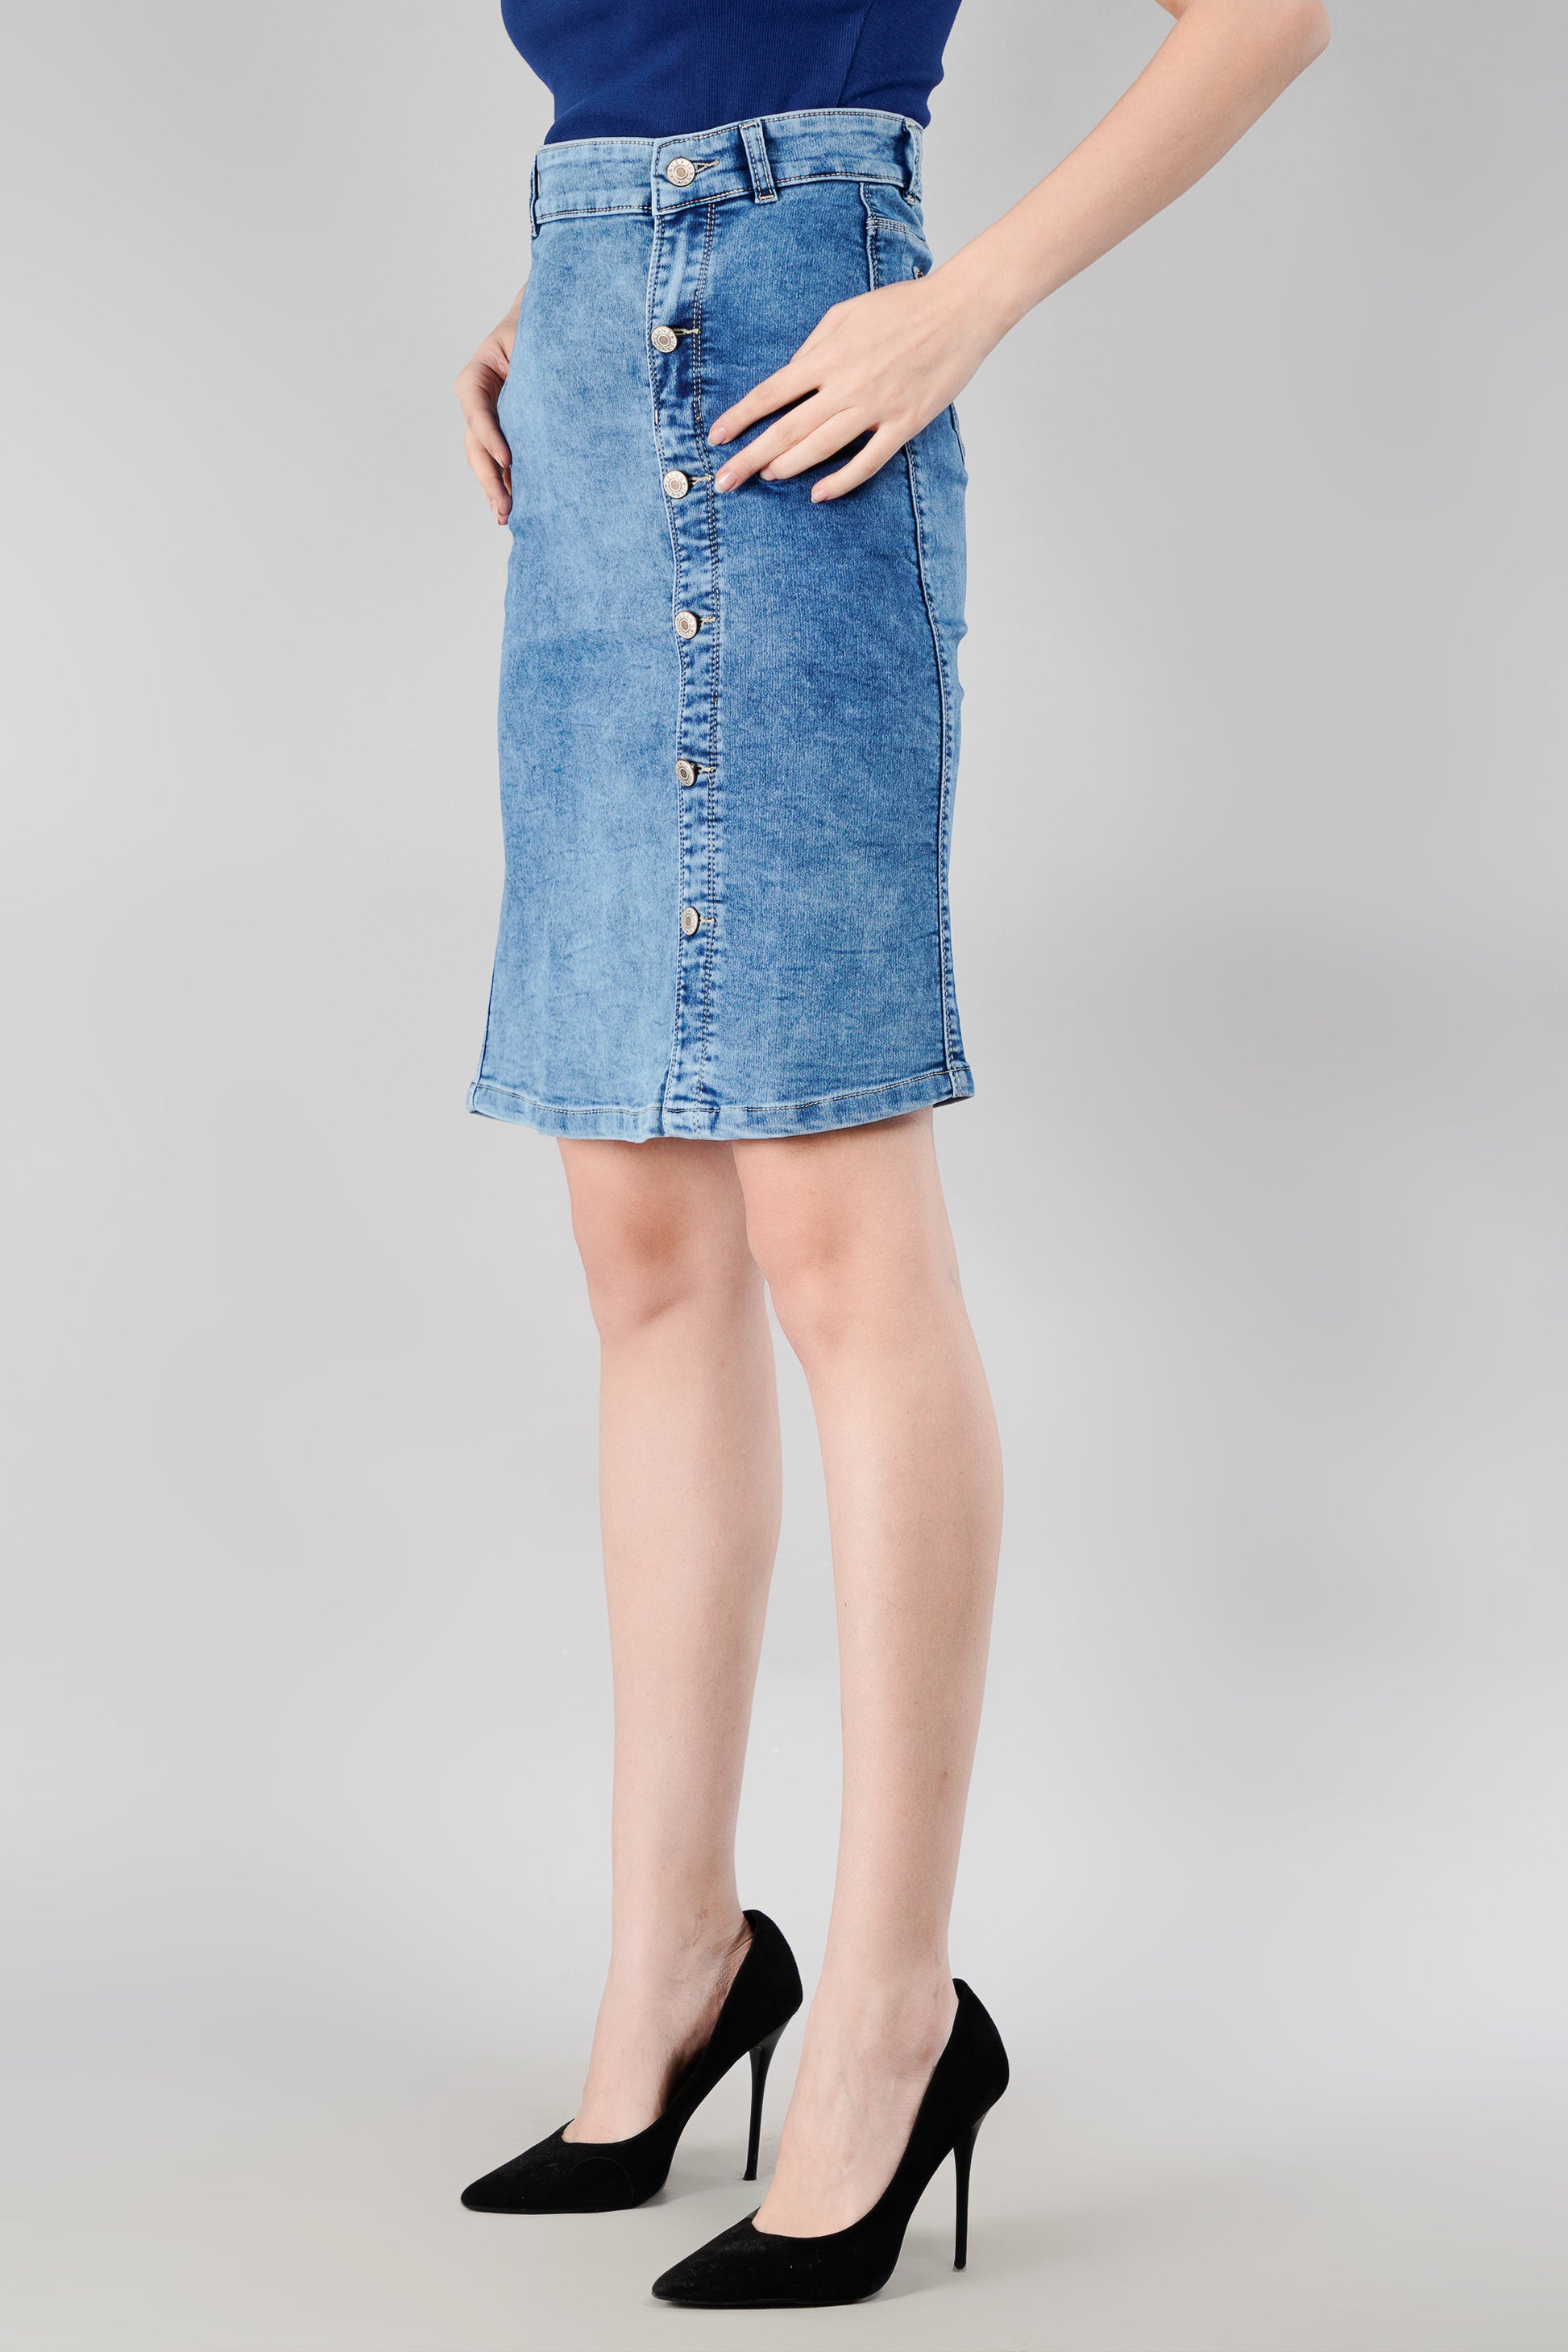 Women's Denim Skirts in Blue by Be Simple